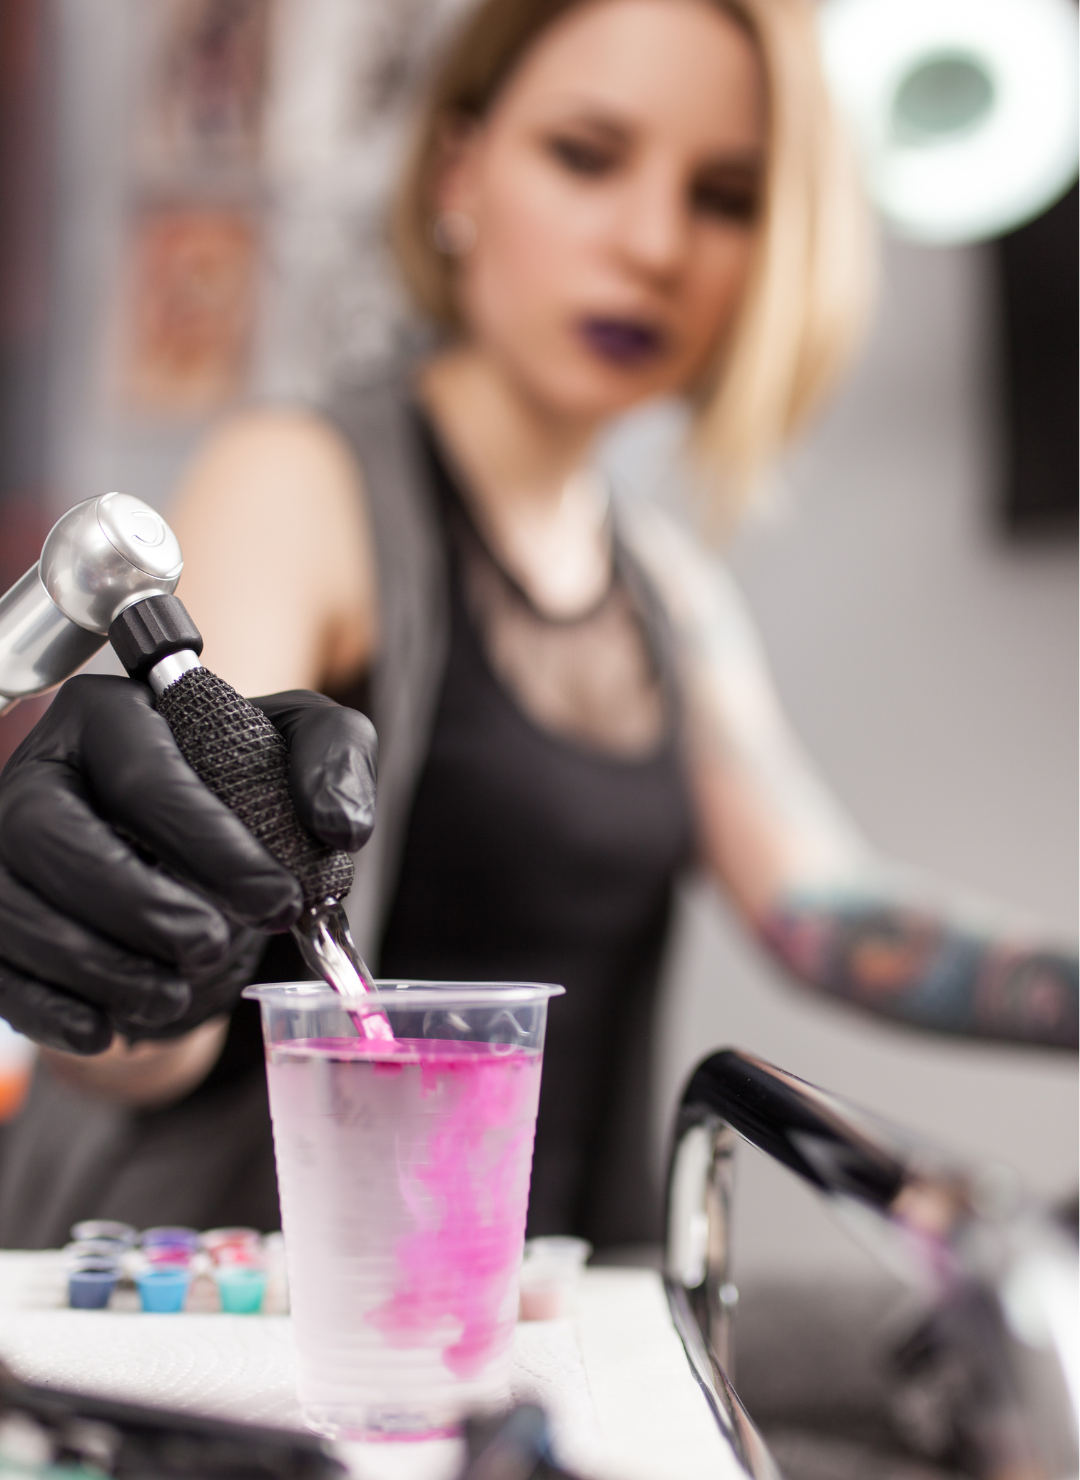 Top 3 Reasons You Should Change Careers And Become A Tattoo Artist In New England